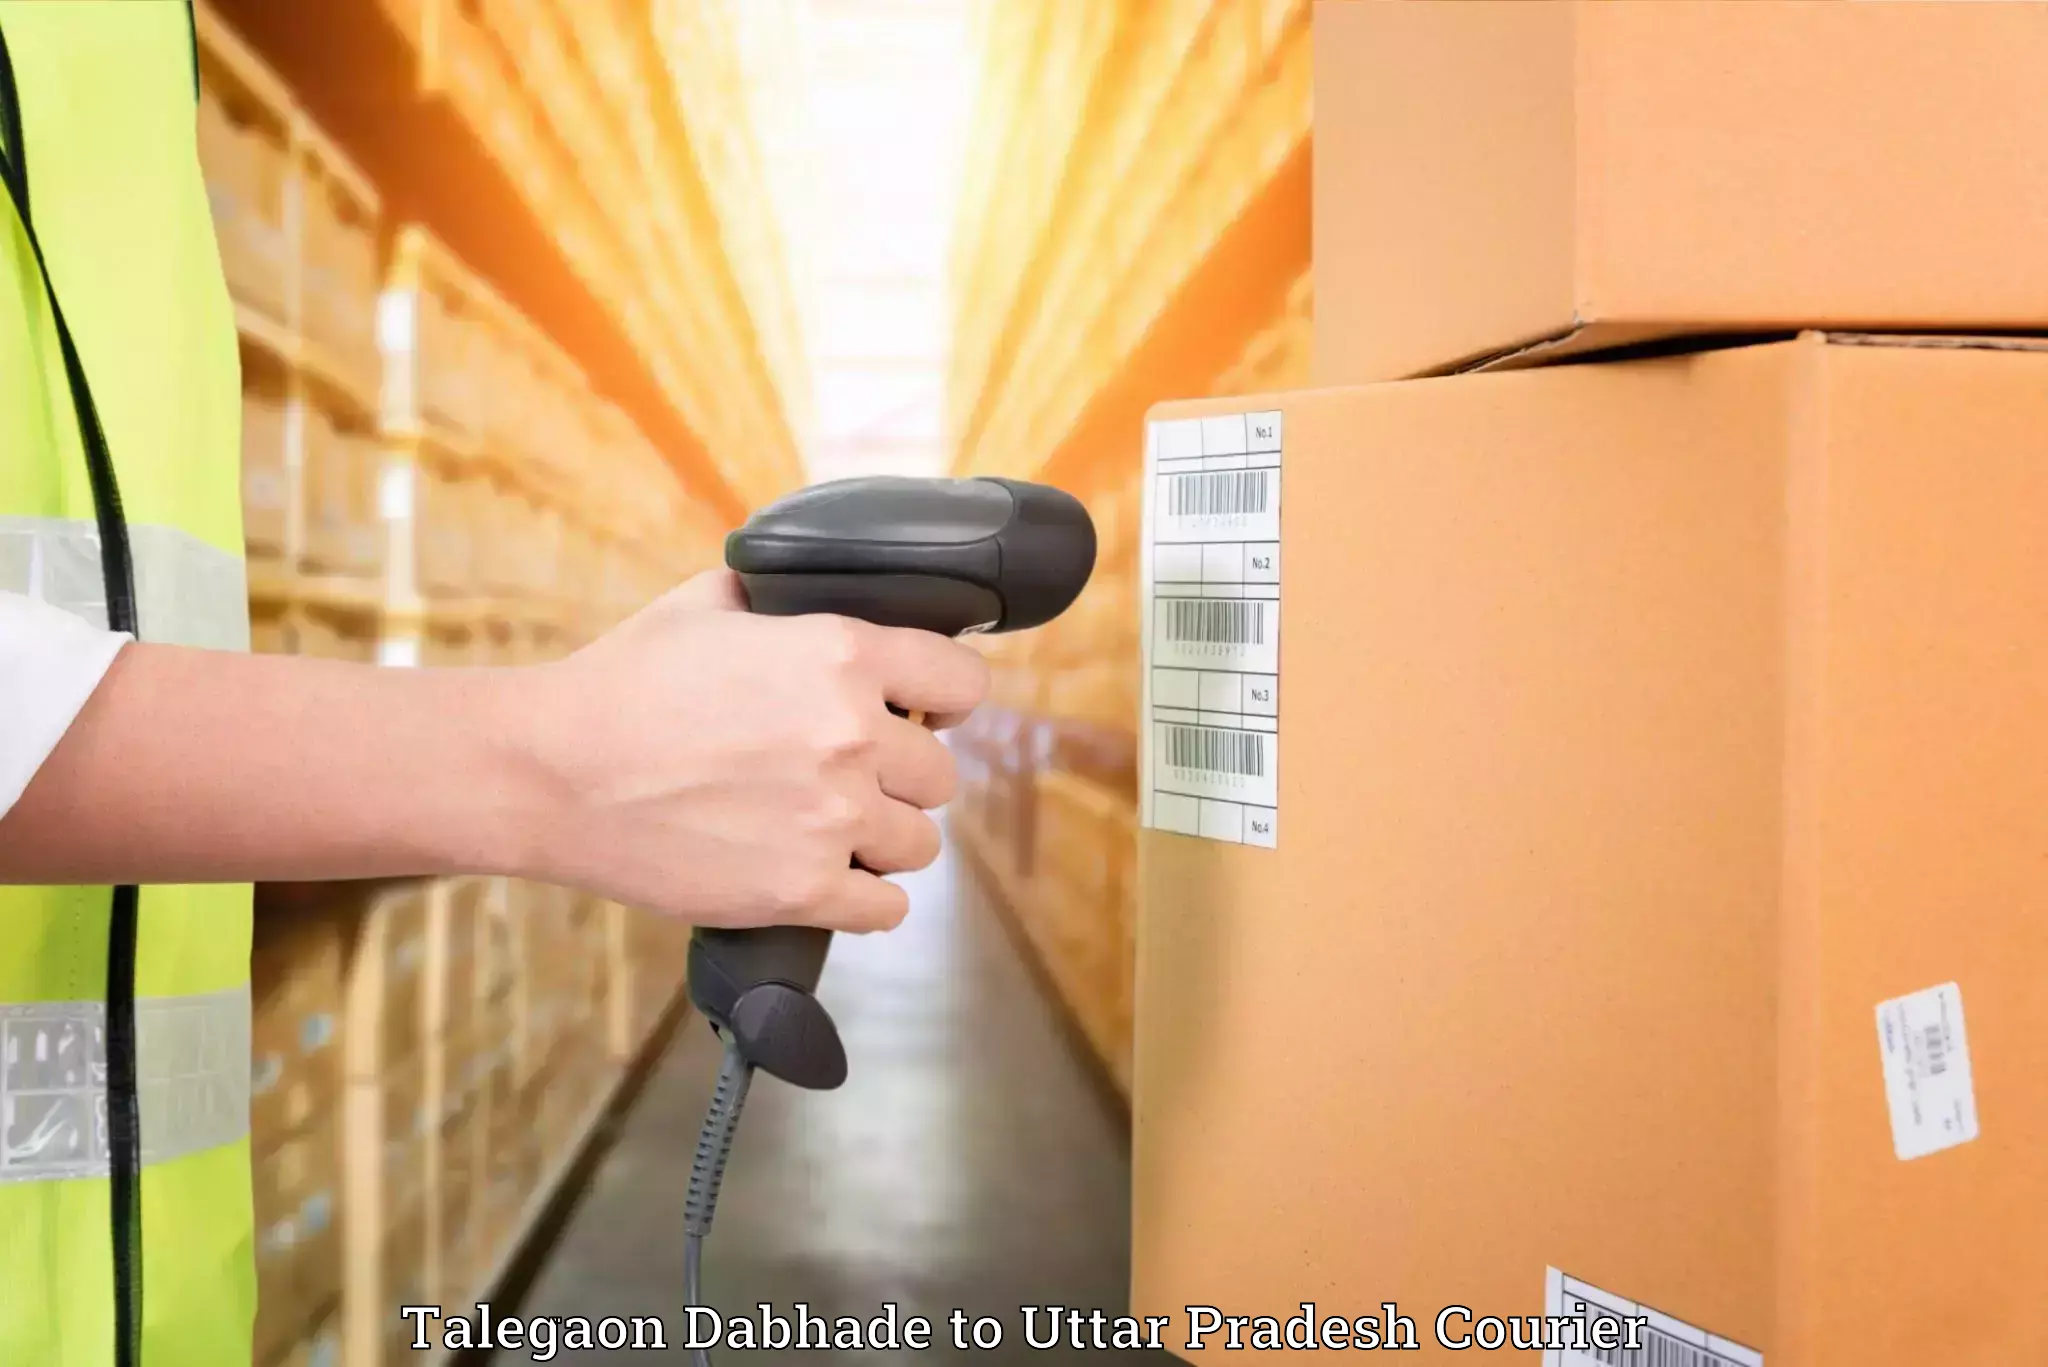 Tailored furniture transport Talegaon Dabhade to Allahabad